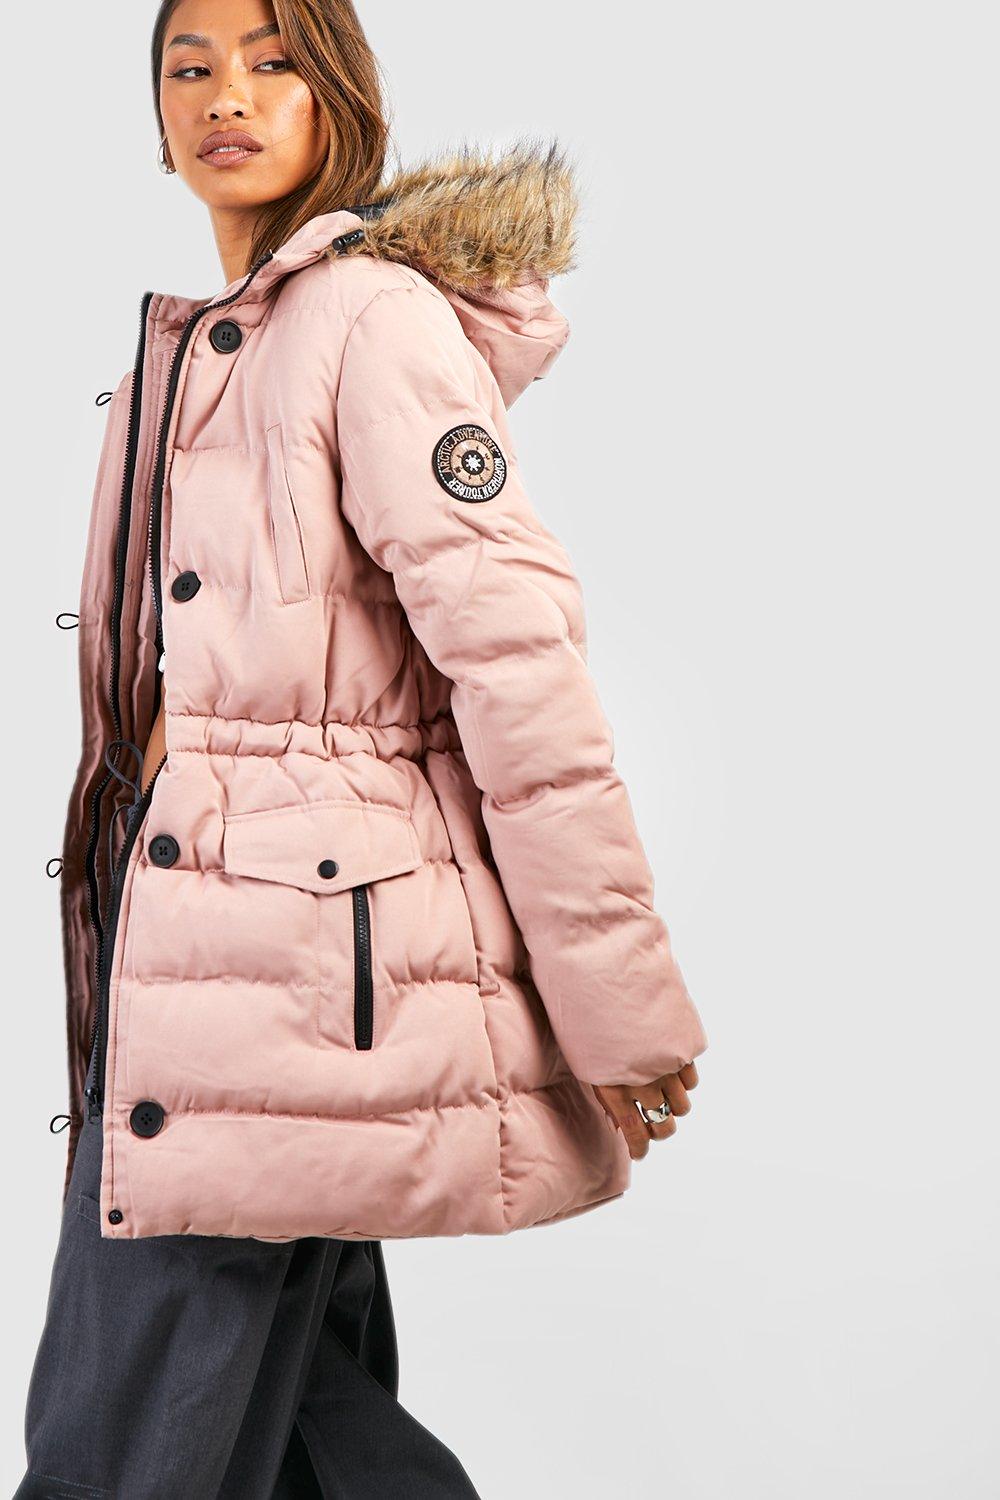 Womens Luxe Mountaineering Parka Coat - Pink - 8, Pink